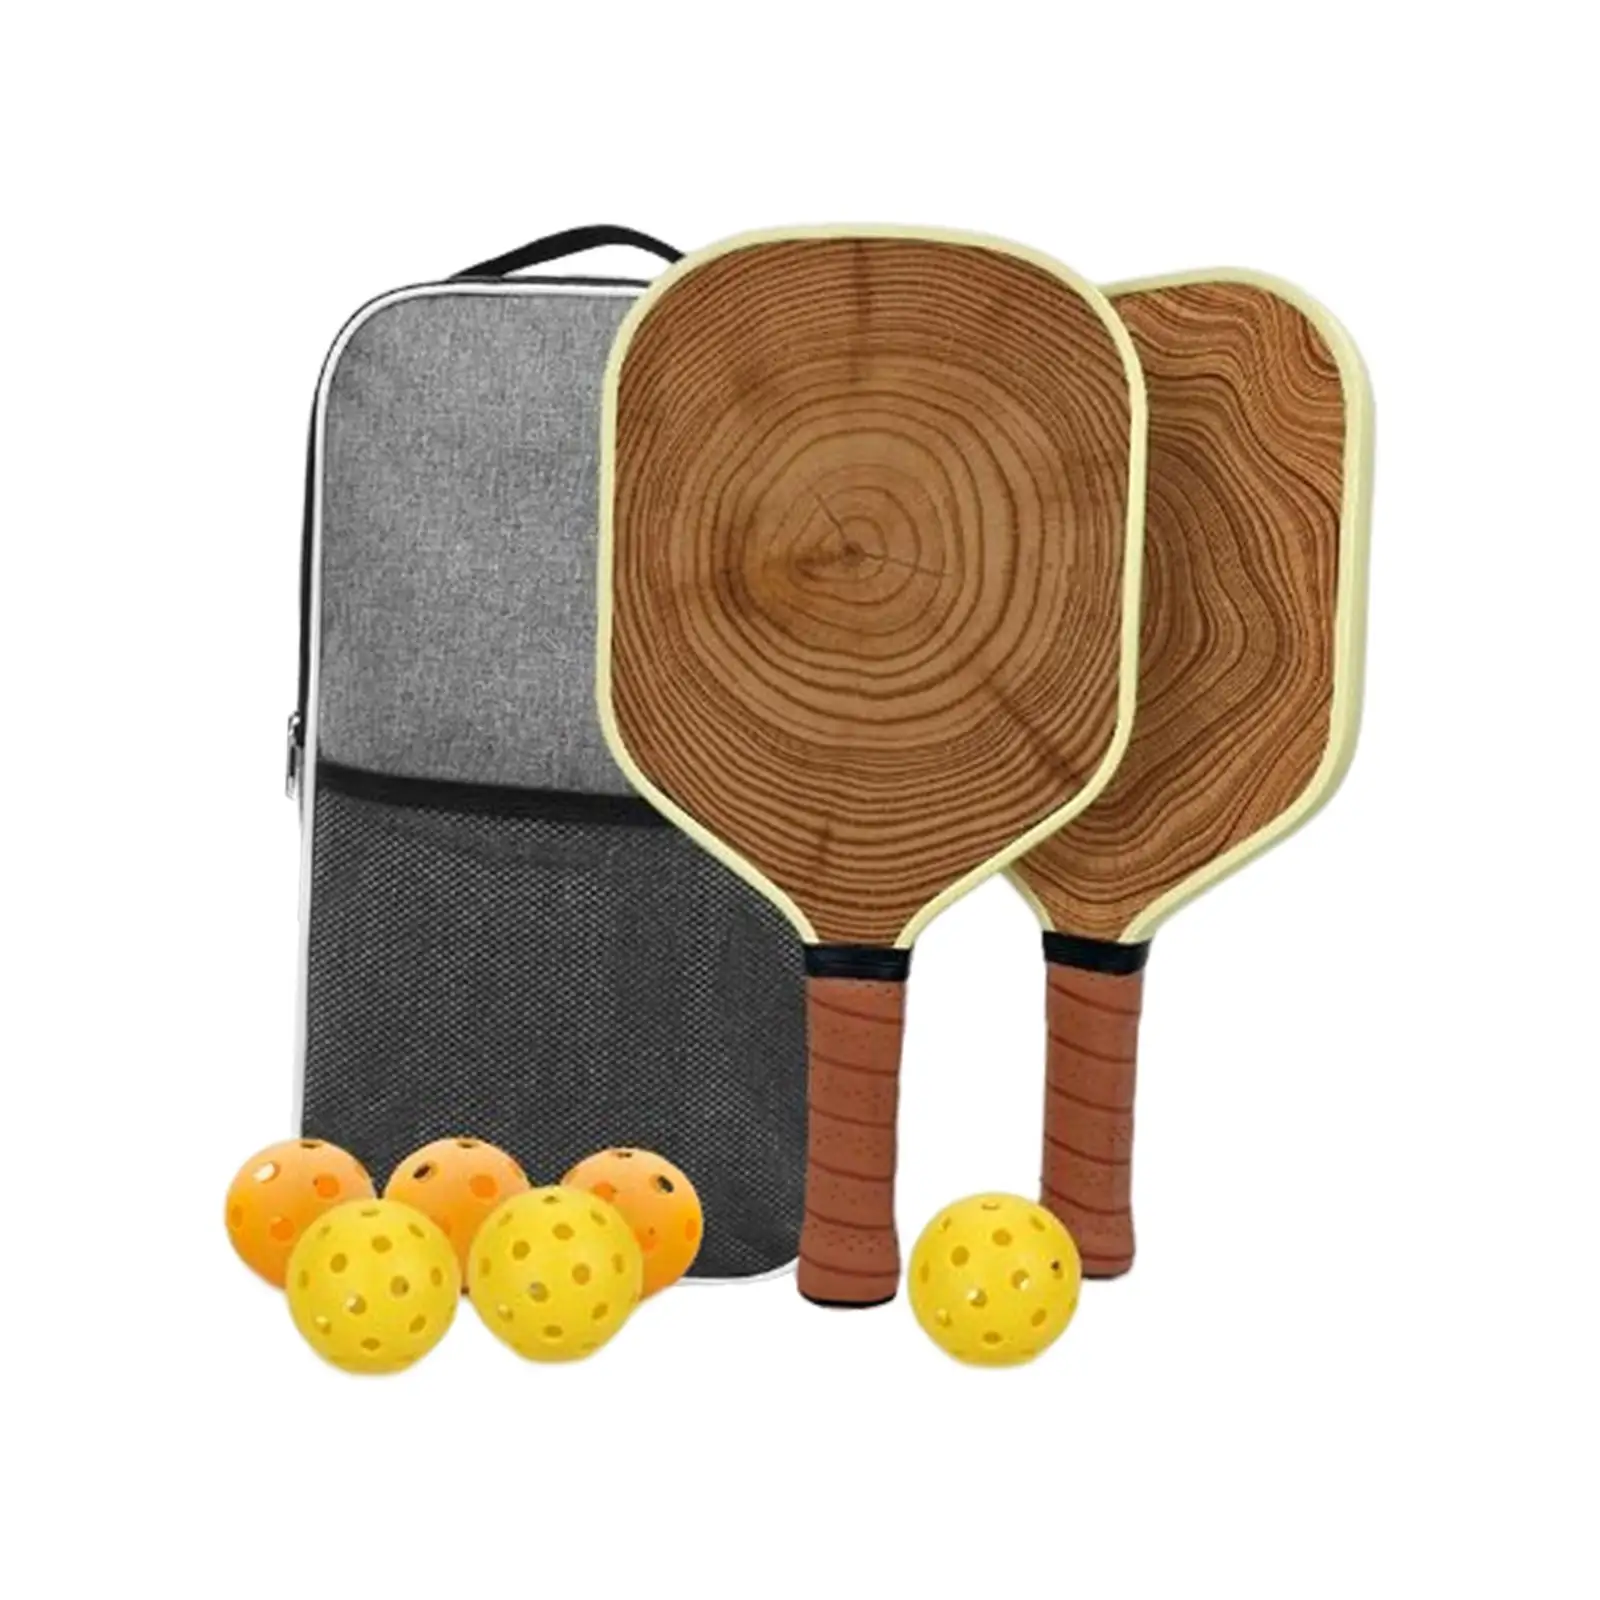 Lightweight Pickleball Paddles Set with Storage Bag 6 Balls Racquets Pickleball Rackets for Indoor Outdoor Use Men Women Player